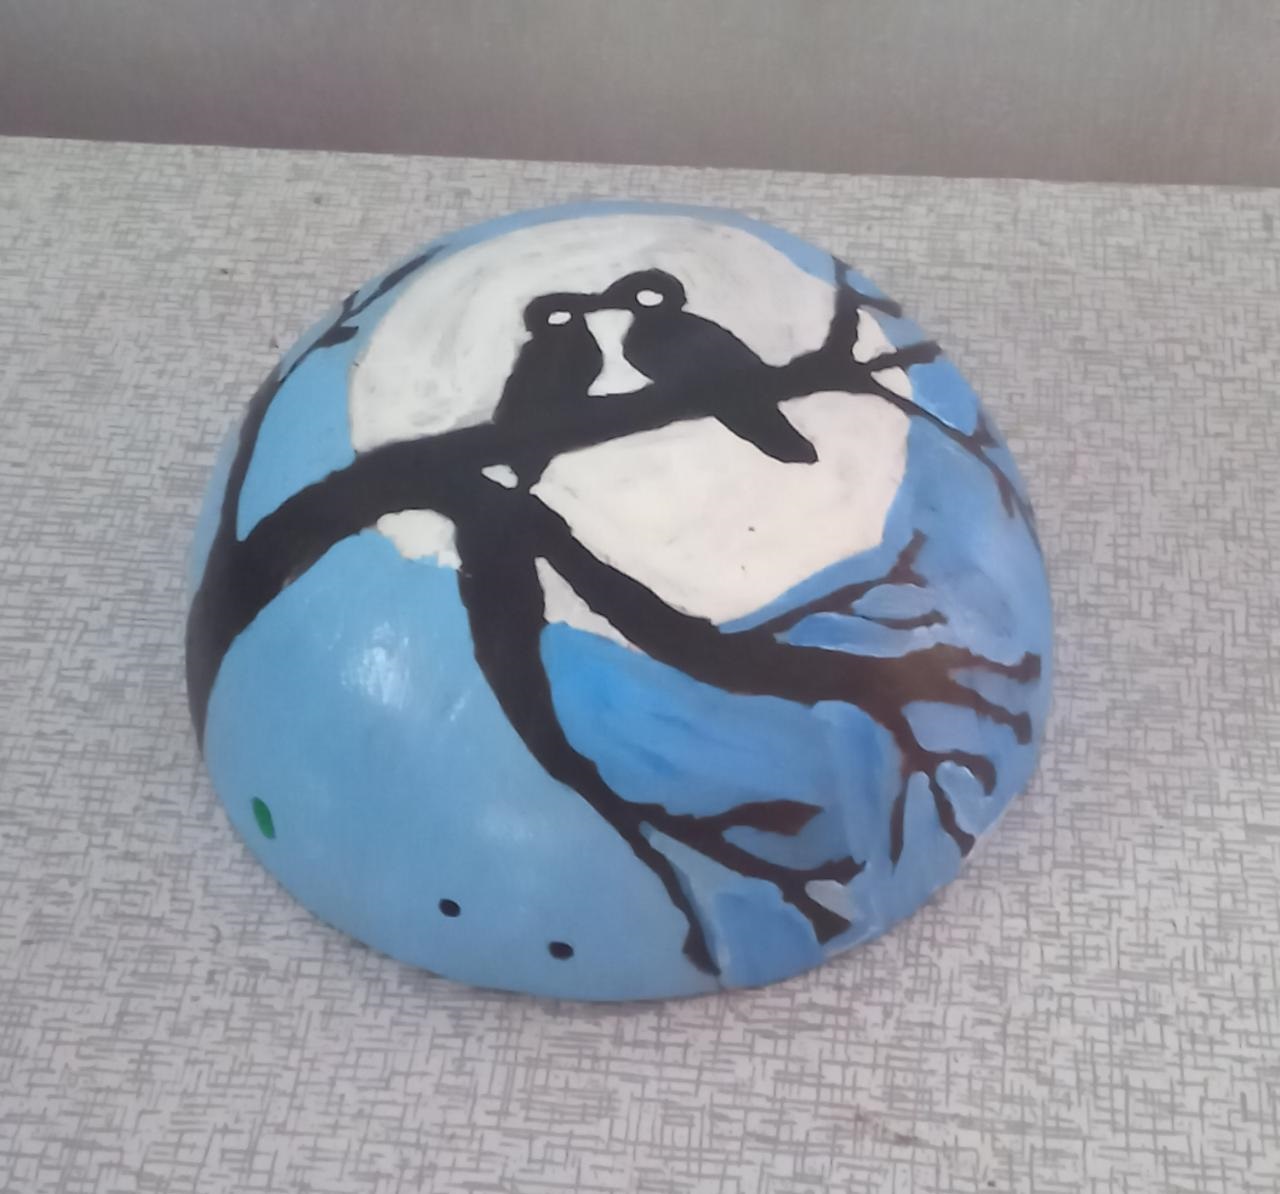 coconut shell bowl with painting art made by trainee